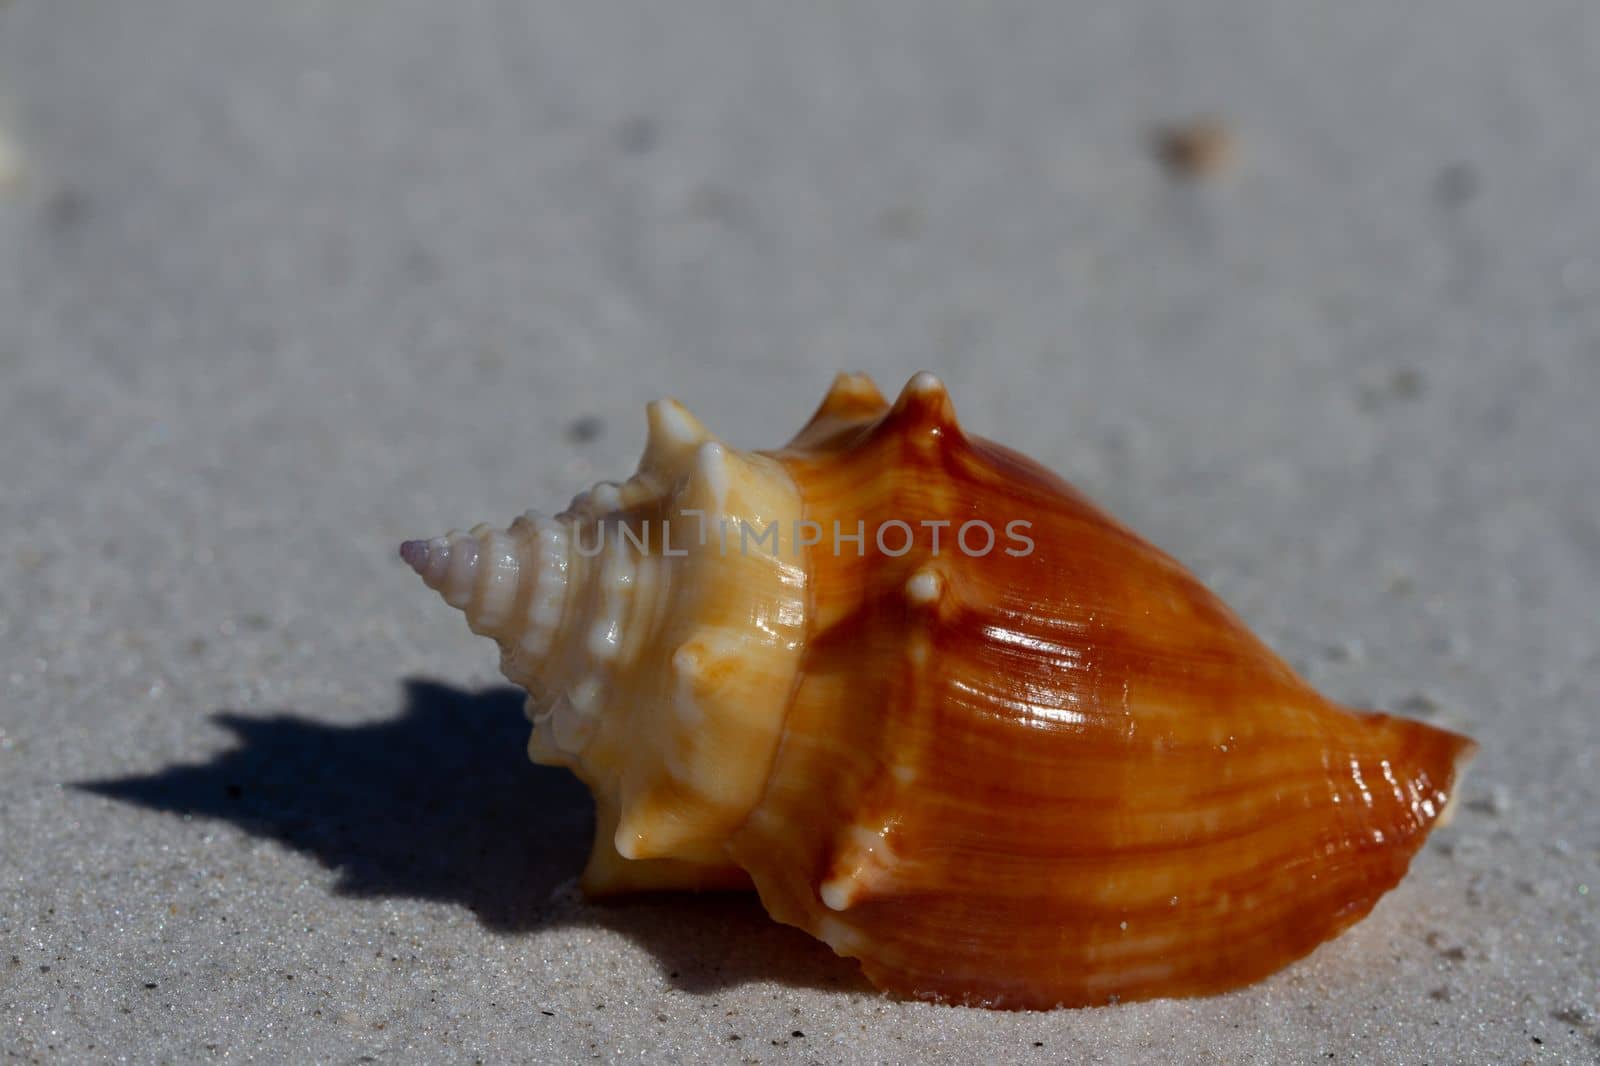 Front view of a Florida fighting conch, Strombus alatus, found on a beach, Naples Florida by Granchinho